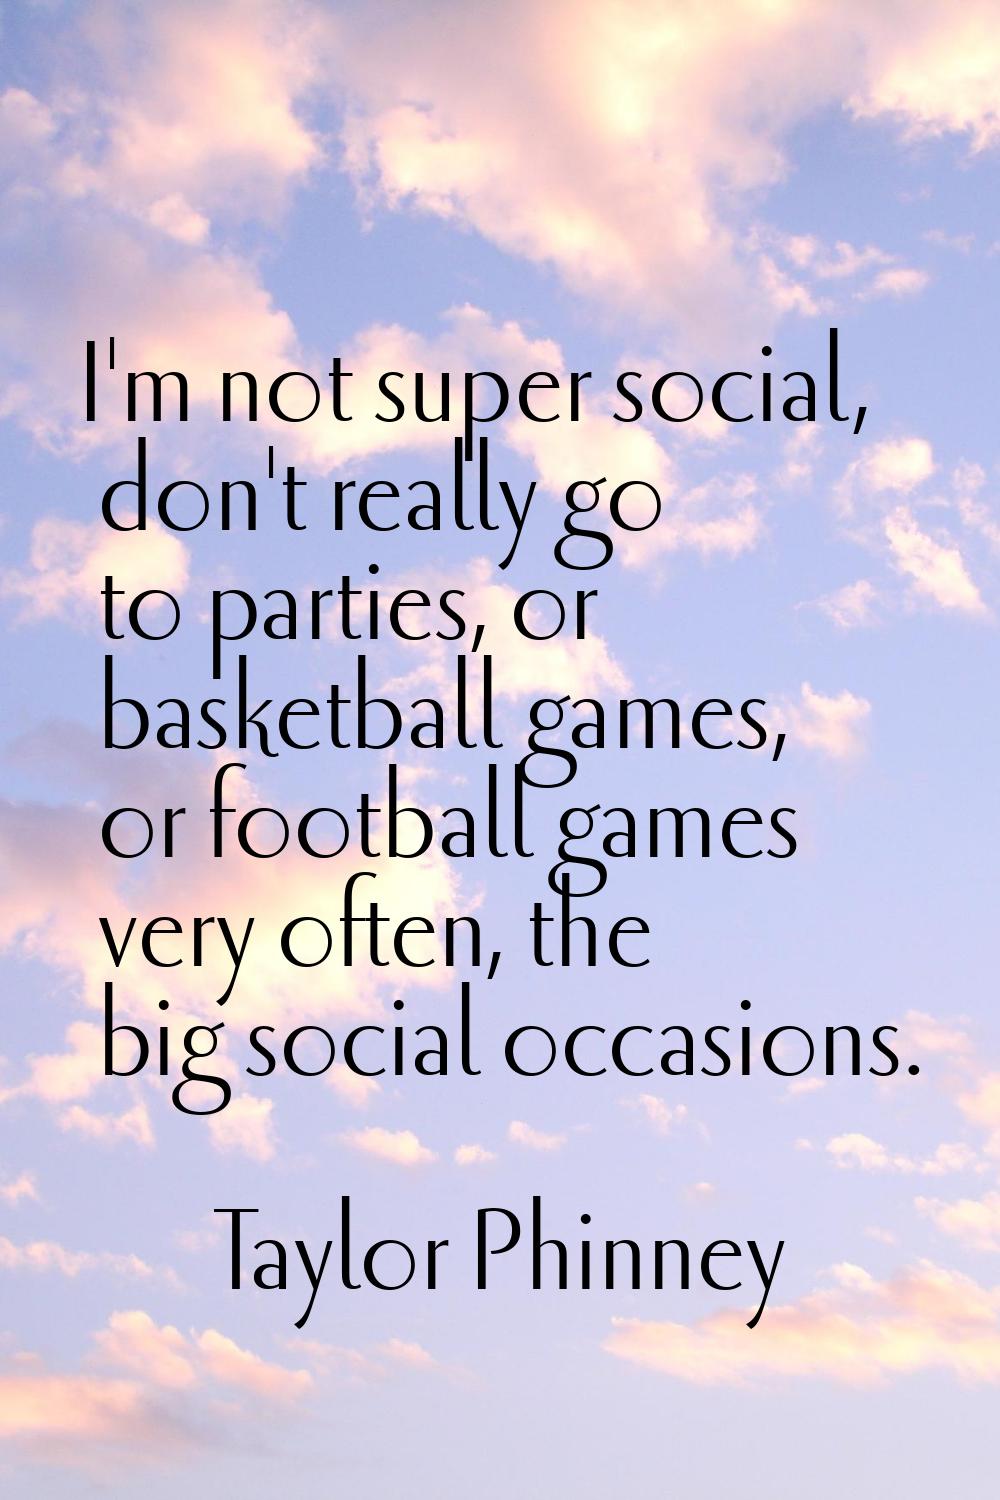 I'm not super social, don't really go to parties, or basketball games, or football games very often